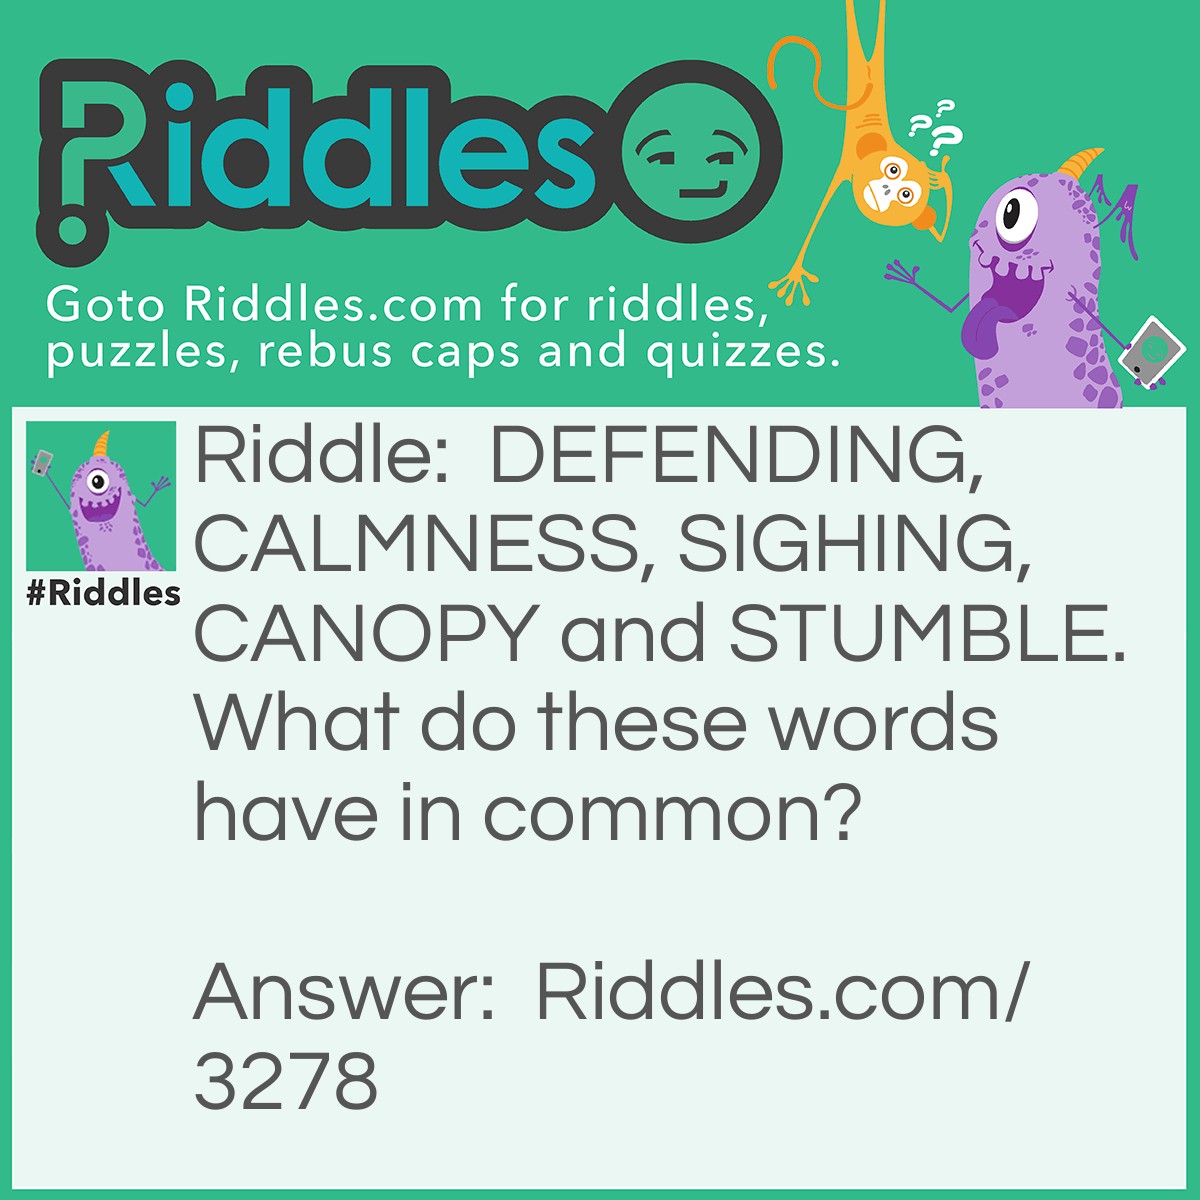 Riddle: DEFENDING, CALMNESS, SIGHING, CANOPY and STUMBLE. What do these words have in common? Answer: They each have 3 letters in common. CA NOP Y.